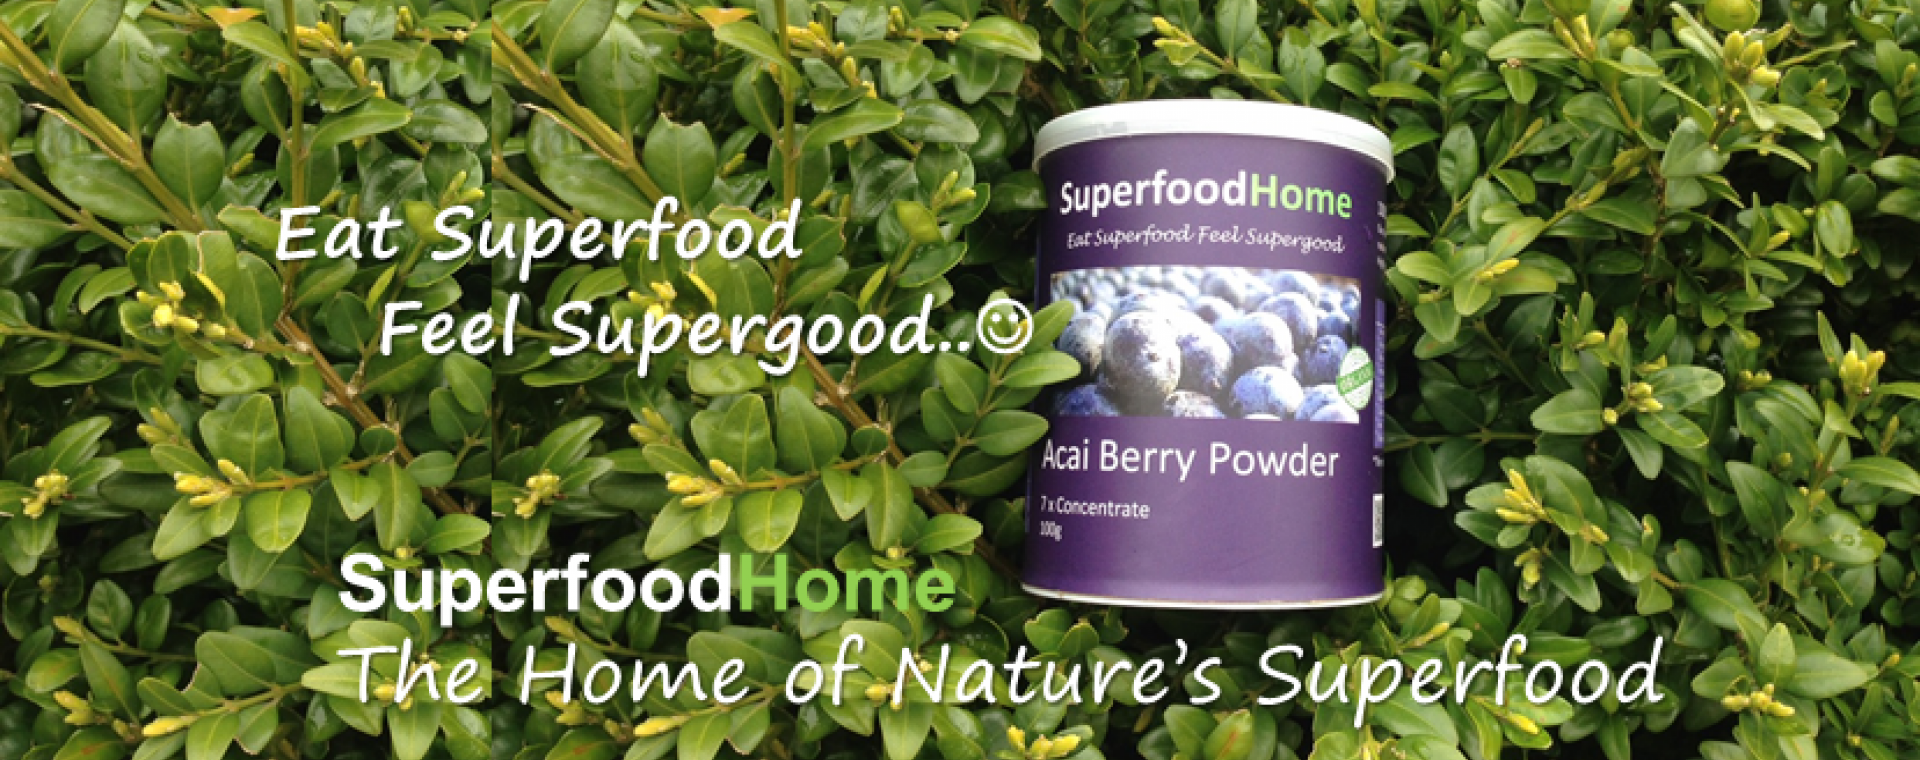 gallery/facebook cover superfoodhome13